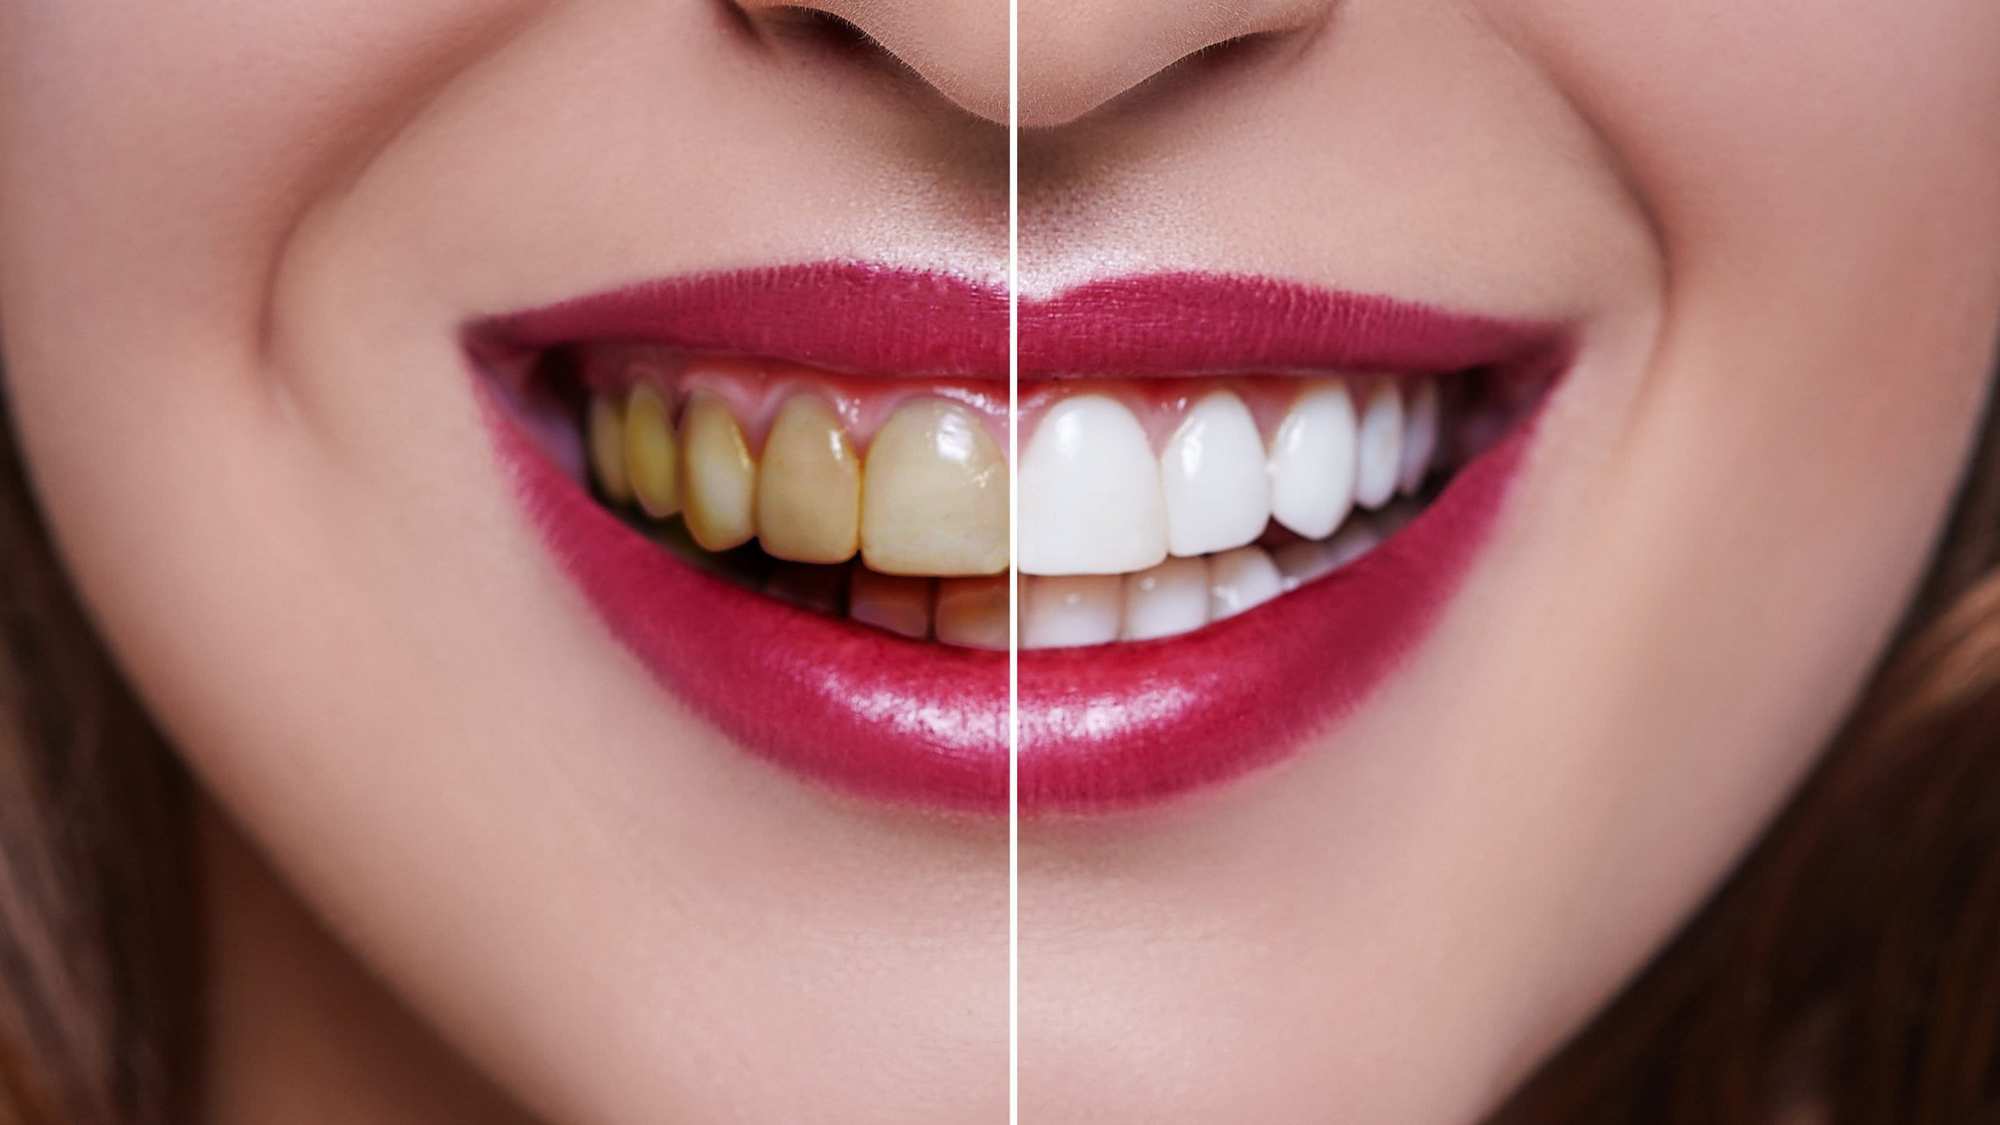 Teeth Whitening: Does it work and is it safe?